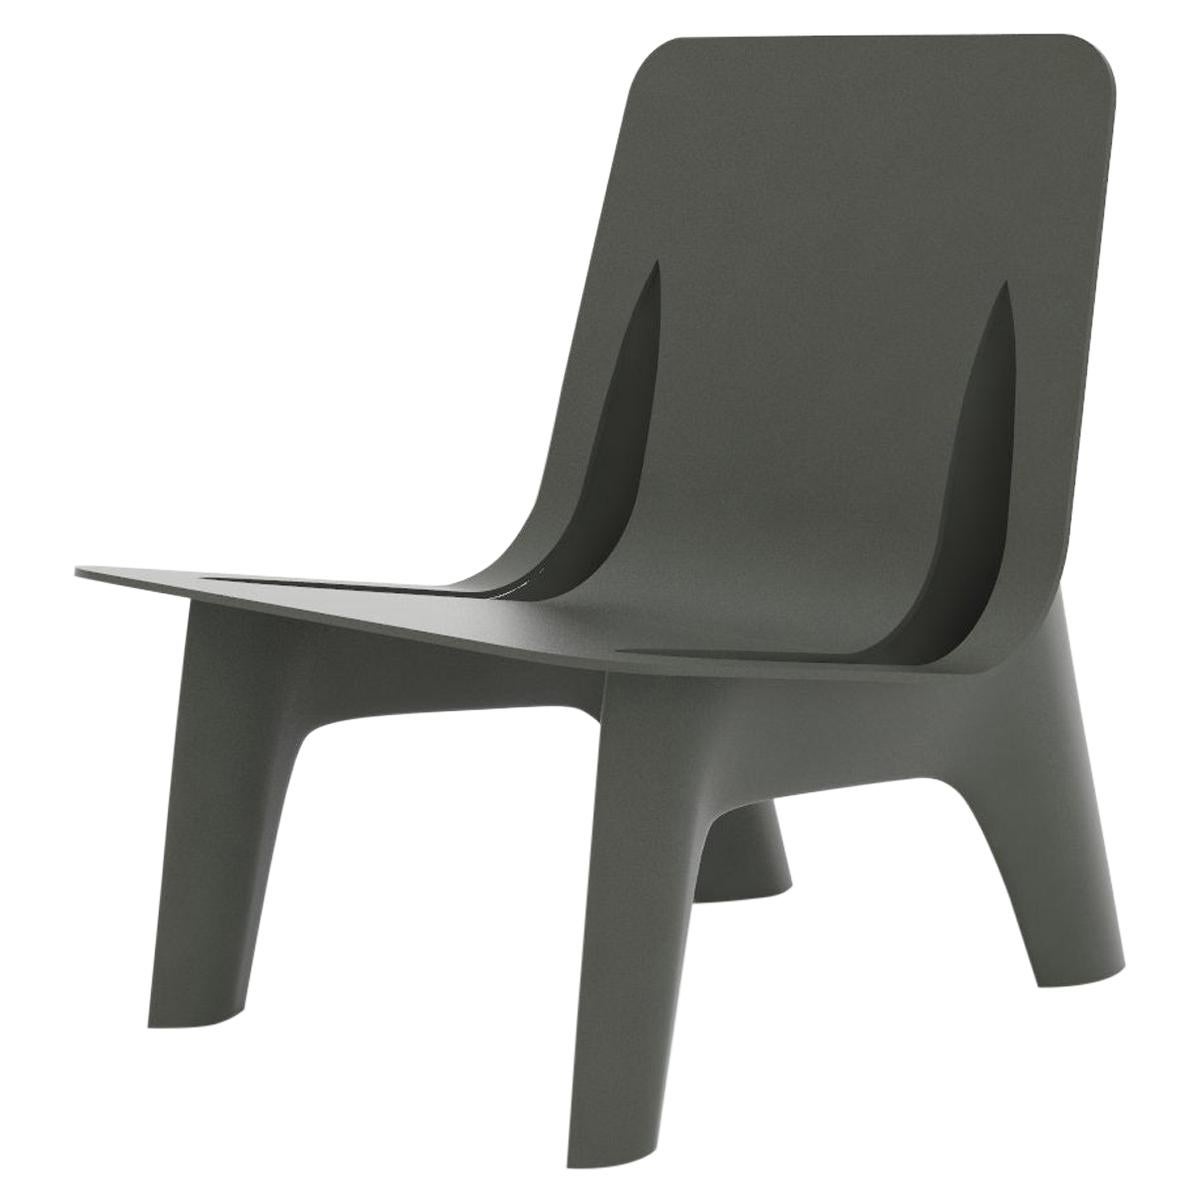 J-Chair Lounge Polished Umbra Grey Color Aluminum Seating by Zieta For Sale